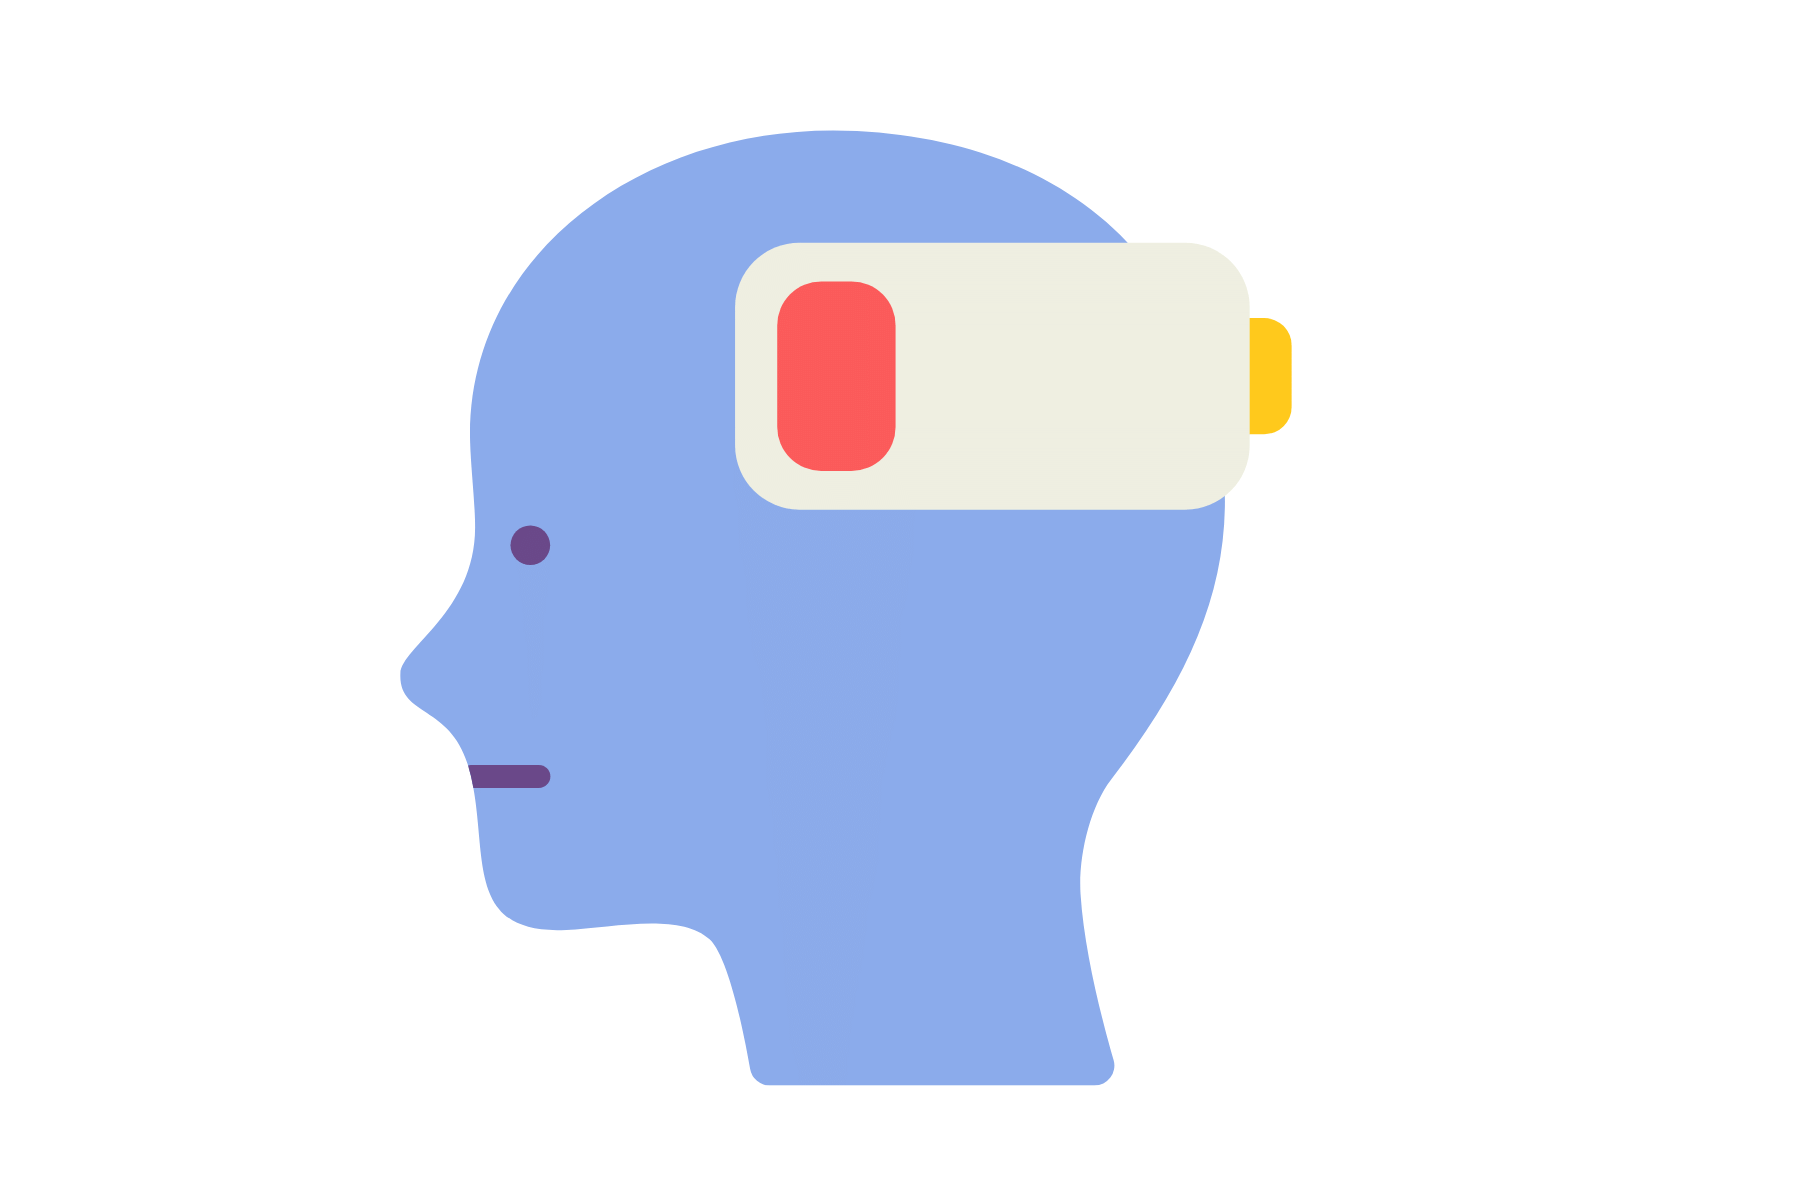 cartoon image of a persons head with a low battery in the brain area